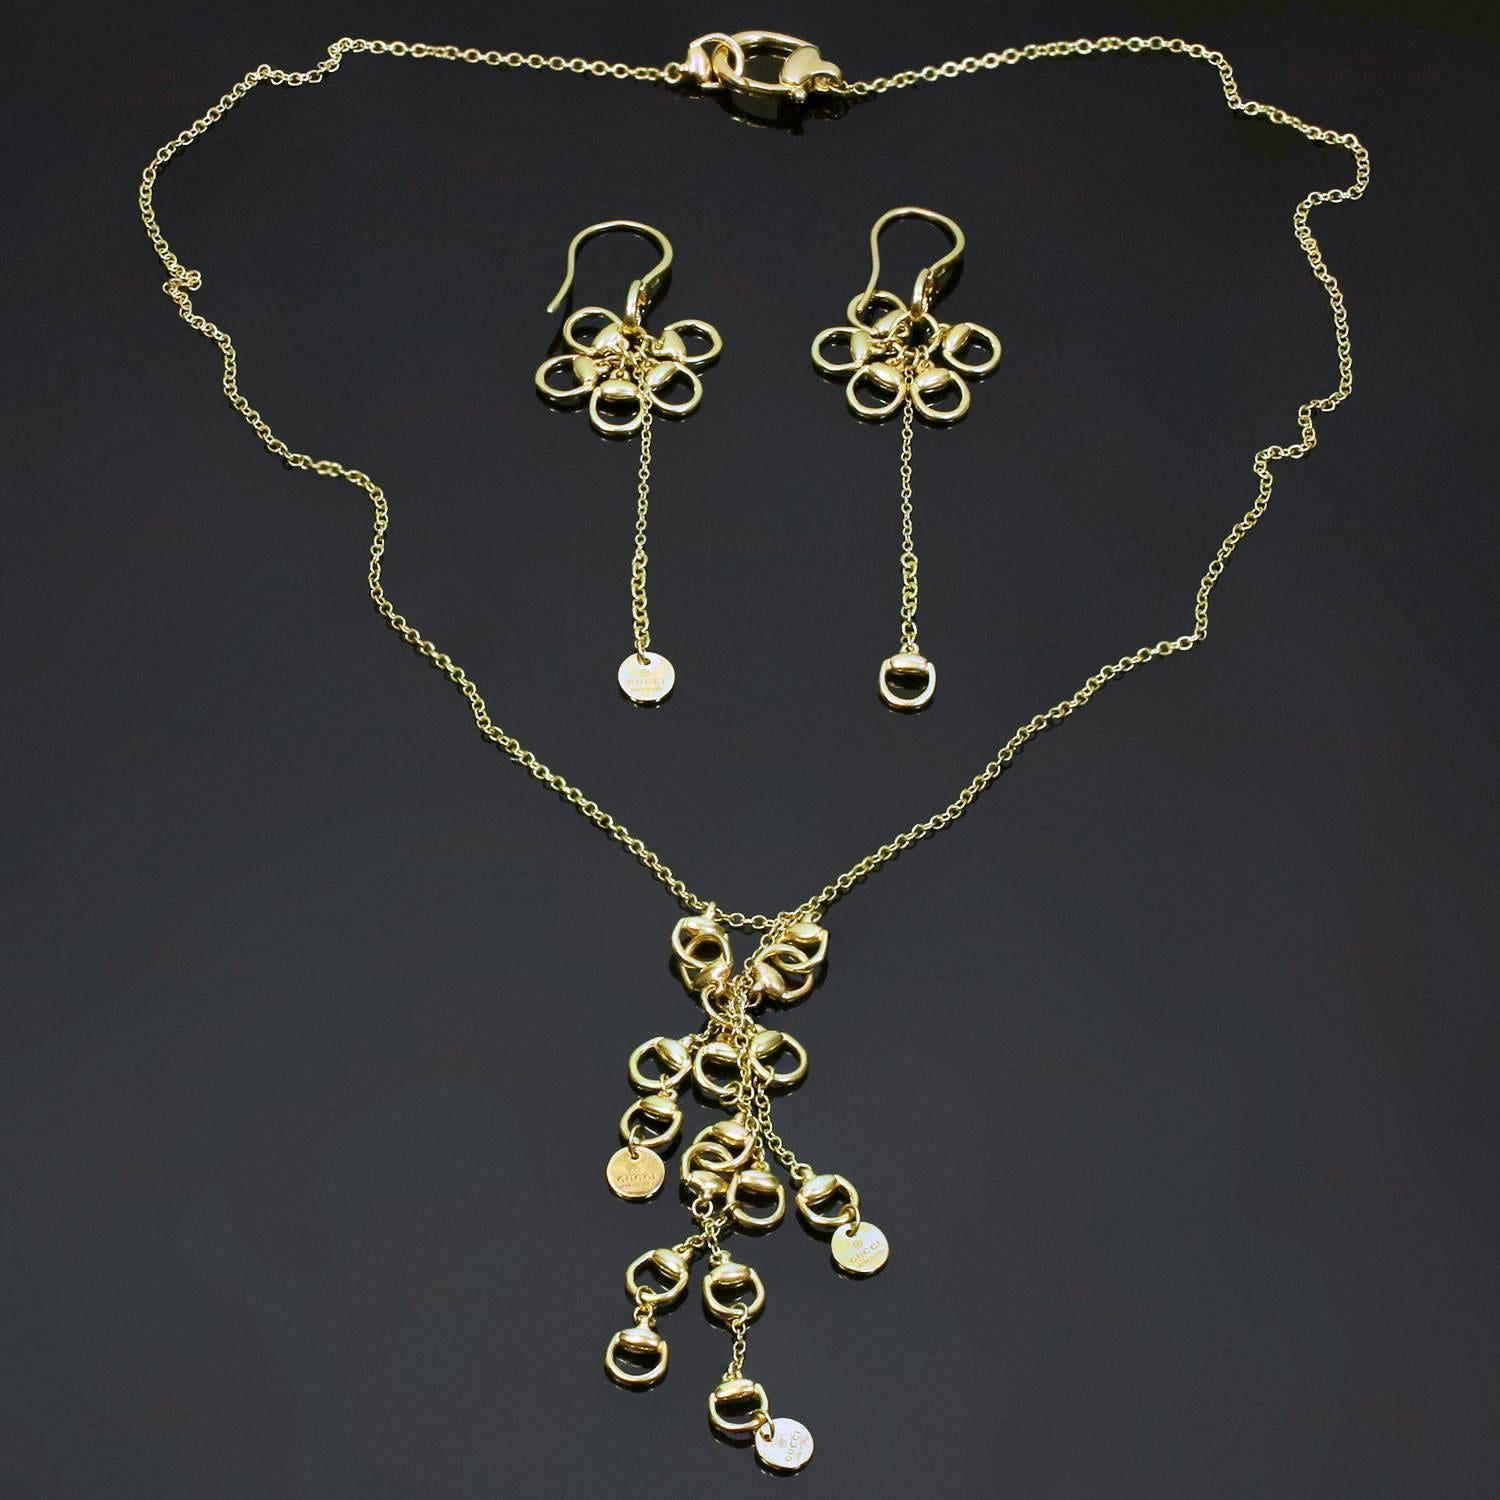 This chic Gucci set from the fabulous horsebit collection is crafted in 18k yellow gold and consists of dangling french wire earrings and a chain necklace with a dangling drop. Made in Italy circa 2010s. Measurements: 2 5/8